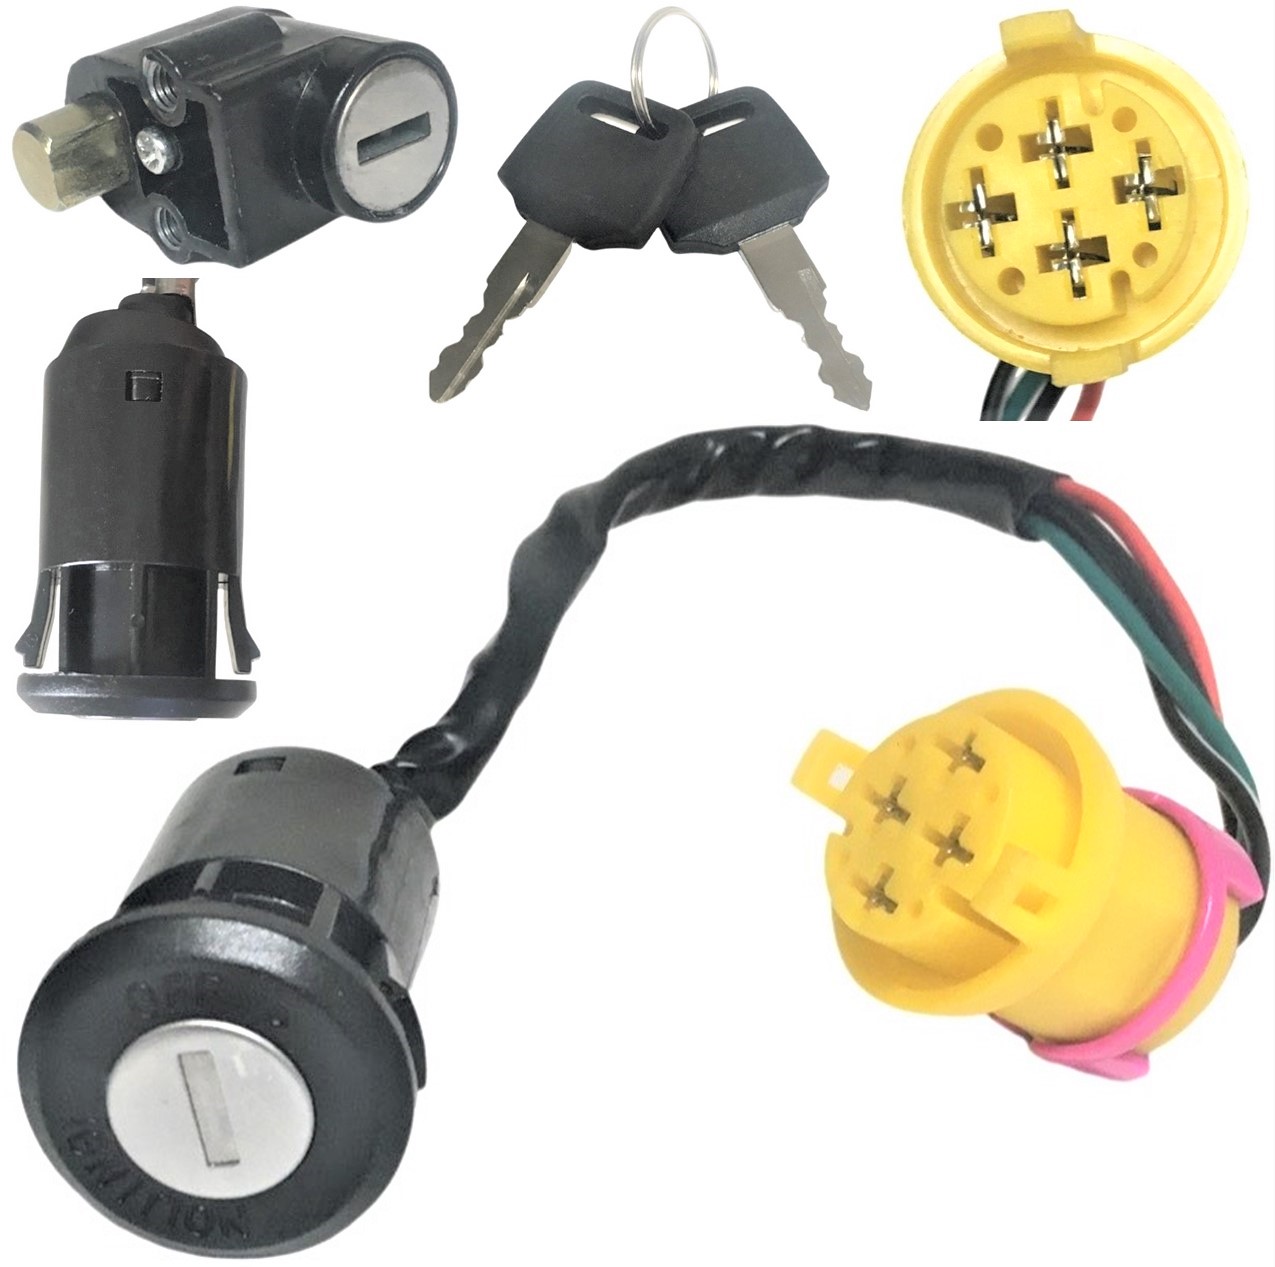 Ignition Switch Fits Many ATVs With Helmet Lock 4 Pin in 4 Pin Round Jack